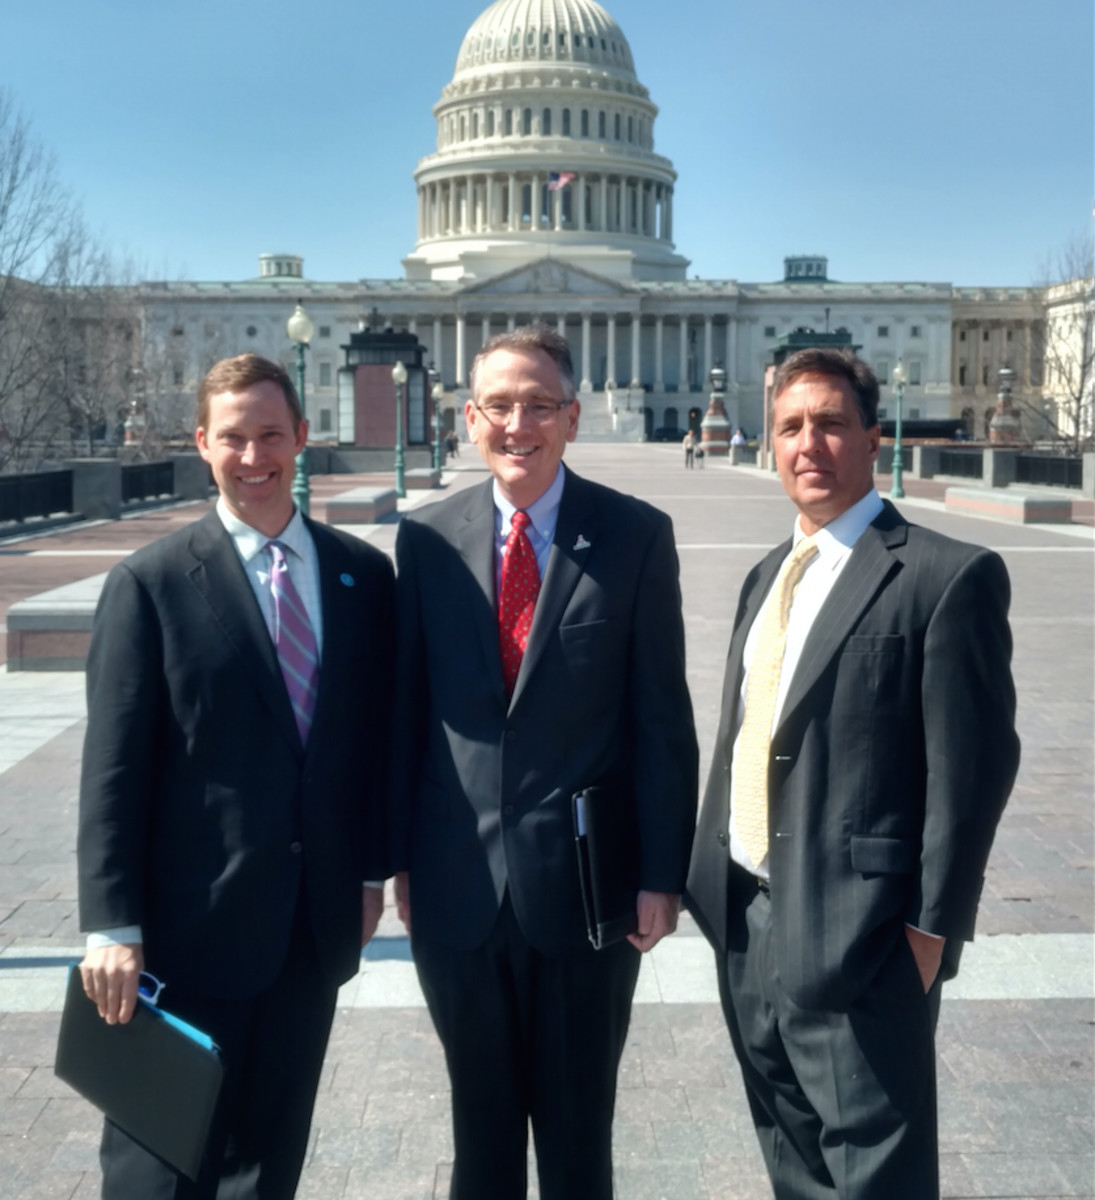 Brad Pickel (left), executive director of the Atlantic Intracoastal Waterway Association; David Kennedy, manager of BoatUS government affairs; and Mark Crosley, chairman of the AIWA board and executive director of the Florida Inland Navigation District, are shown in Washington, D.C.